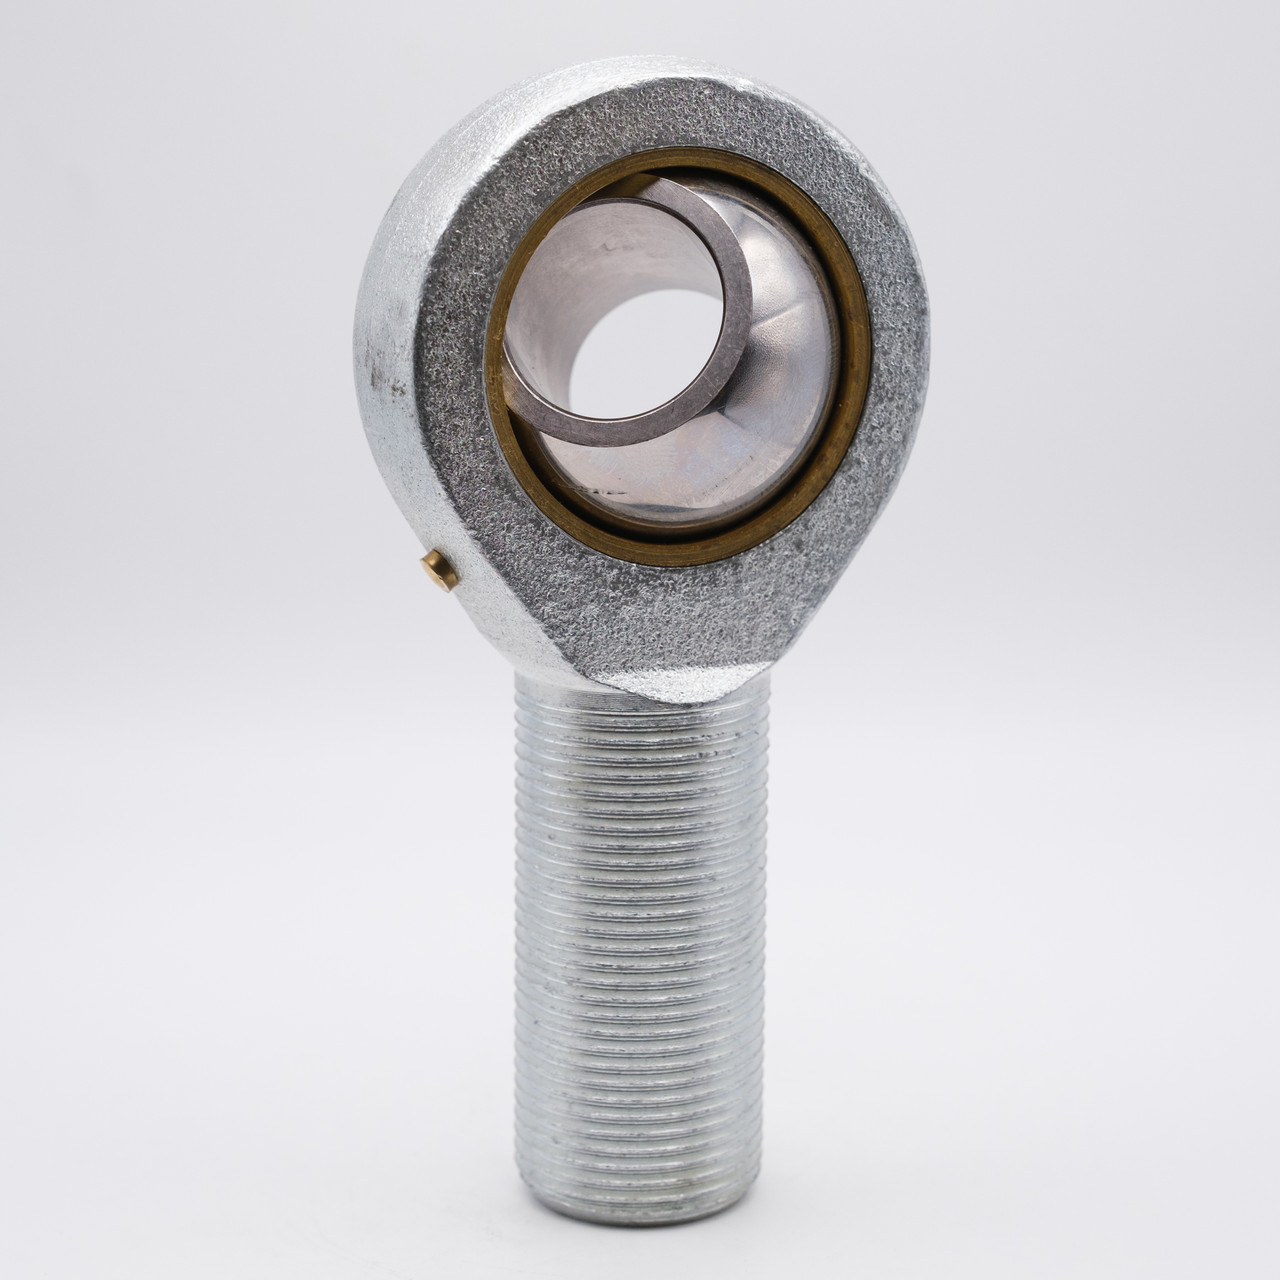 3mm POS3 Male Rod-End Bearing Right Hand Side View